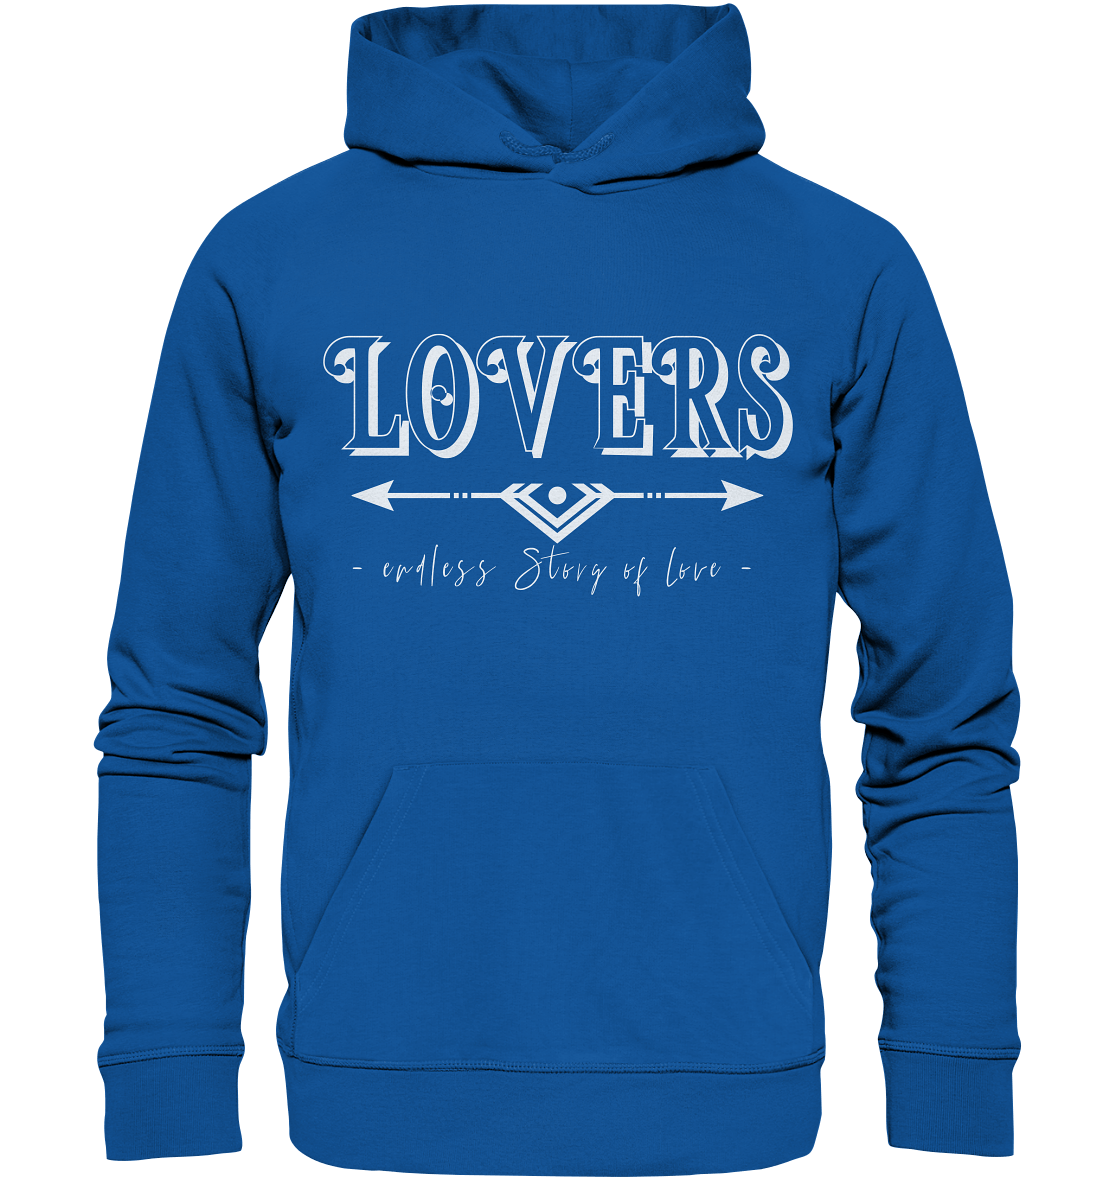 LOVERS endless story of Love Pärchen Pullover in blau endless love couple goals hoodie